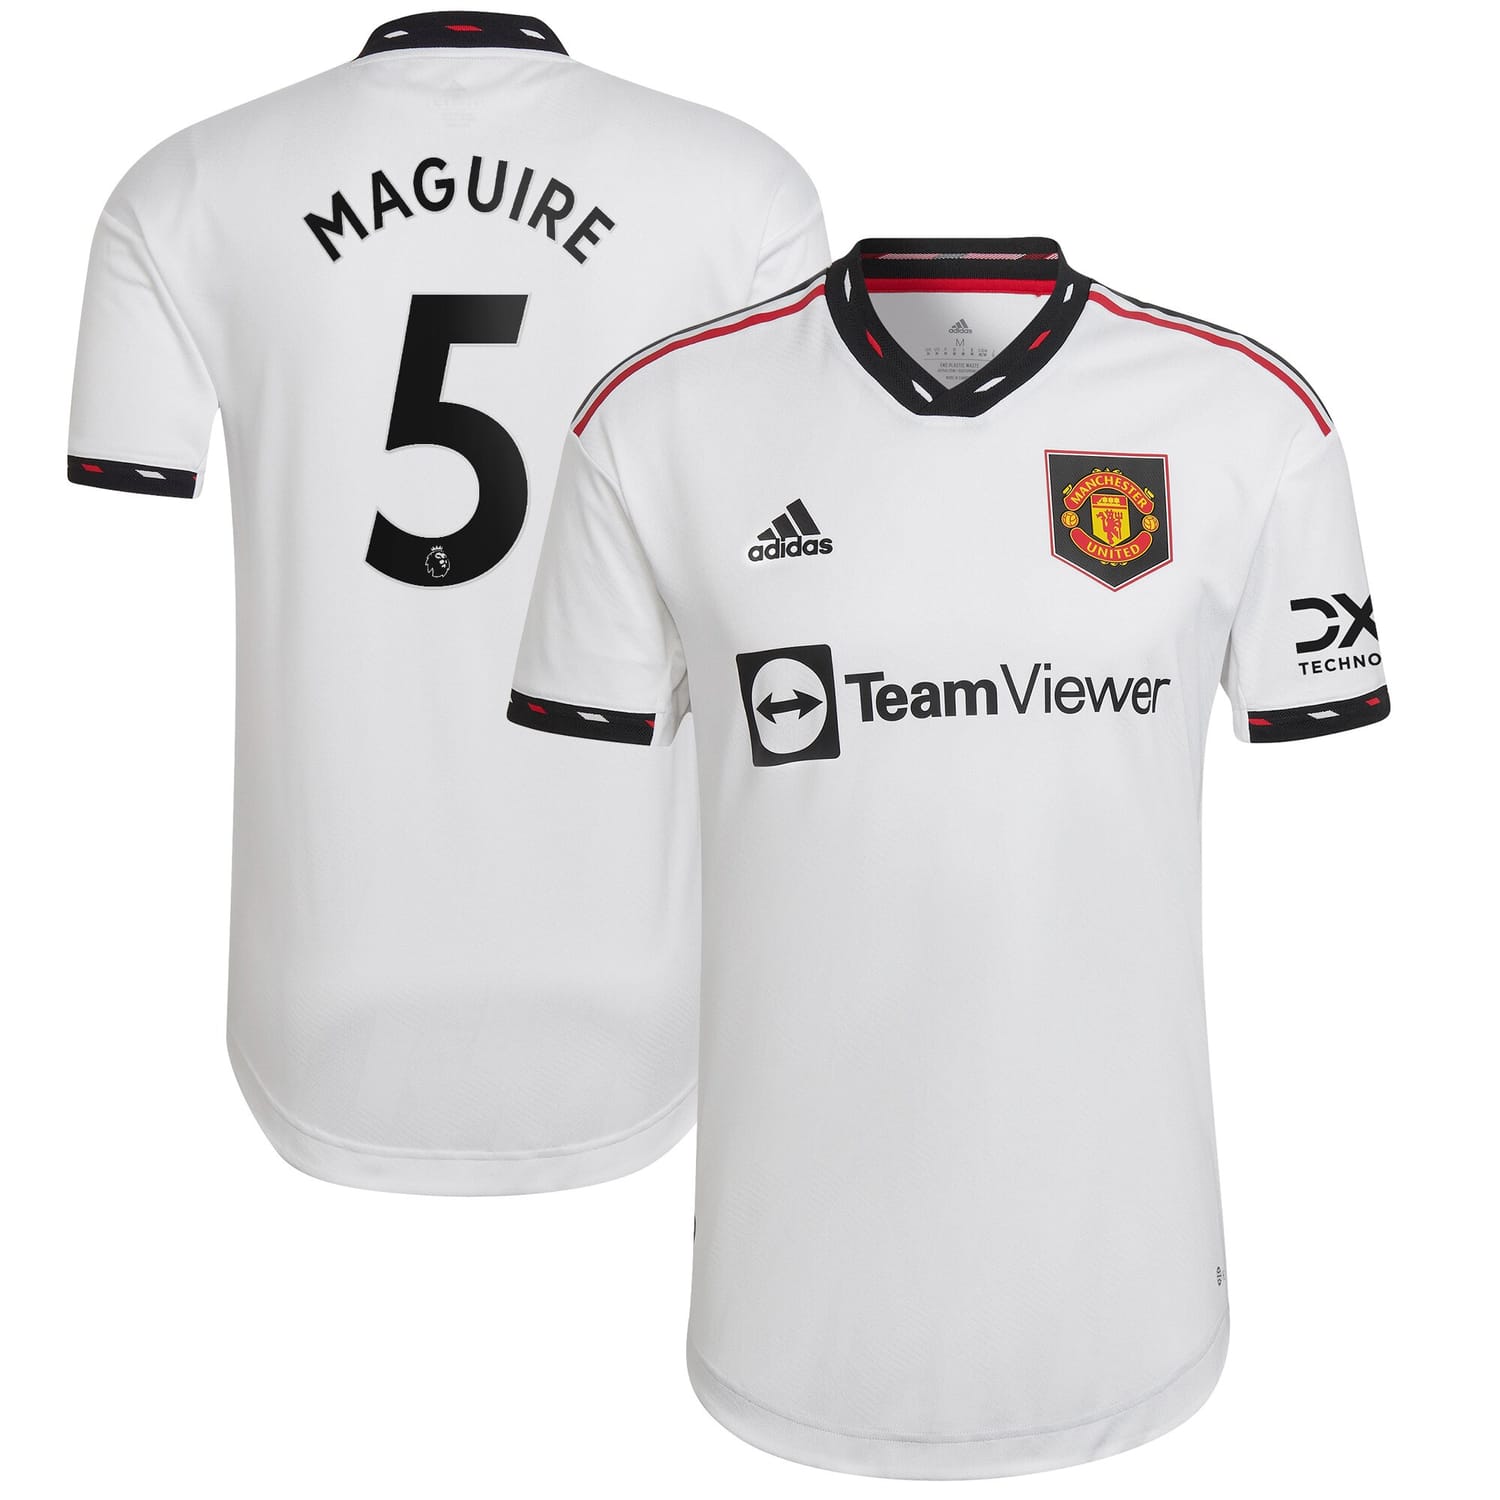 Premier League Manchester United Away Authentic Jersey Shirt 2022-23 player Harry Maguire 5 printing for Men